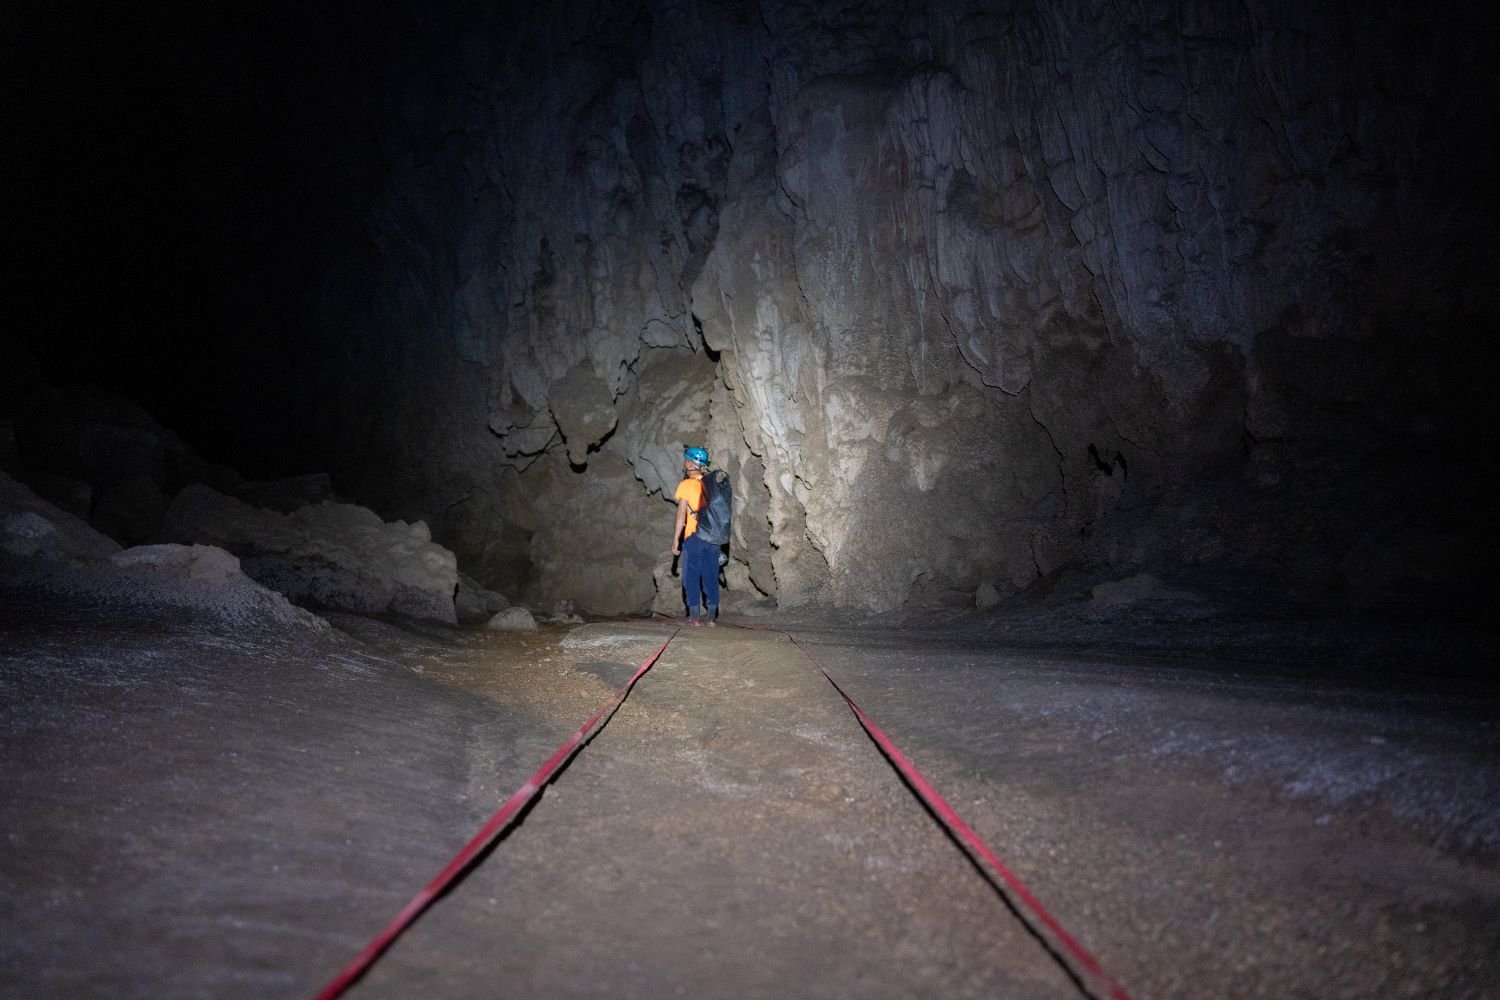 To avoid damaging the cave floor, separate paths will be marked.